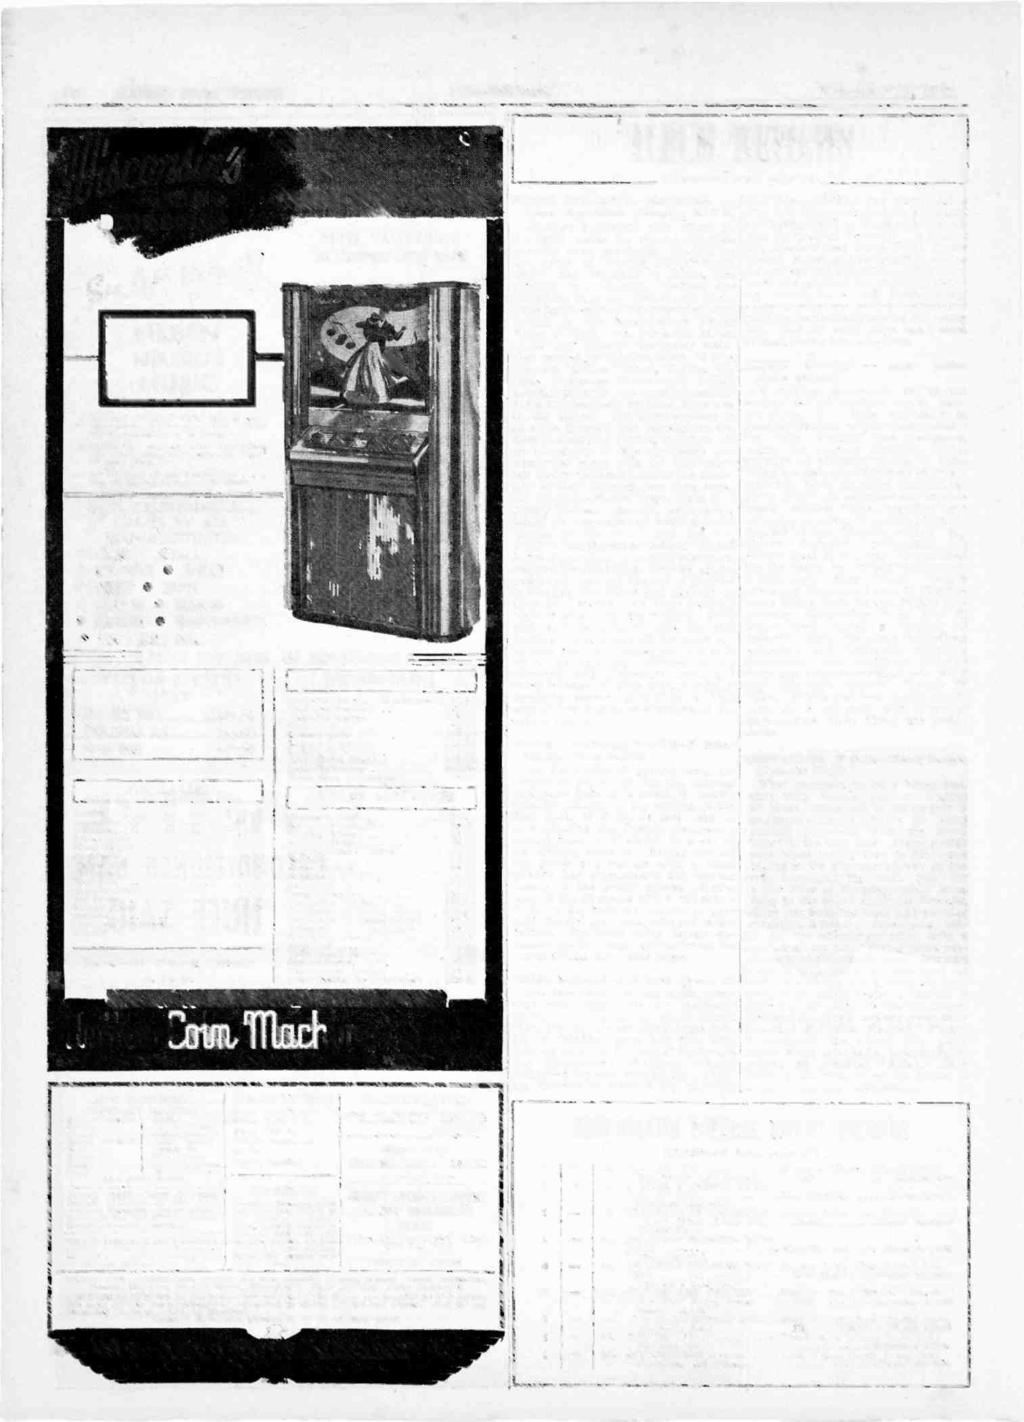 j ON 116 COIN MACHINES The Billboard November 15, 1947 LEADING DISTRIBUTOR FILBEN MIRROCLE MUSIC The only REALLY NEW Idea In automatte music. 30 -record selection.